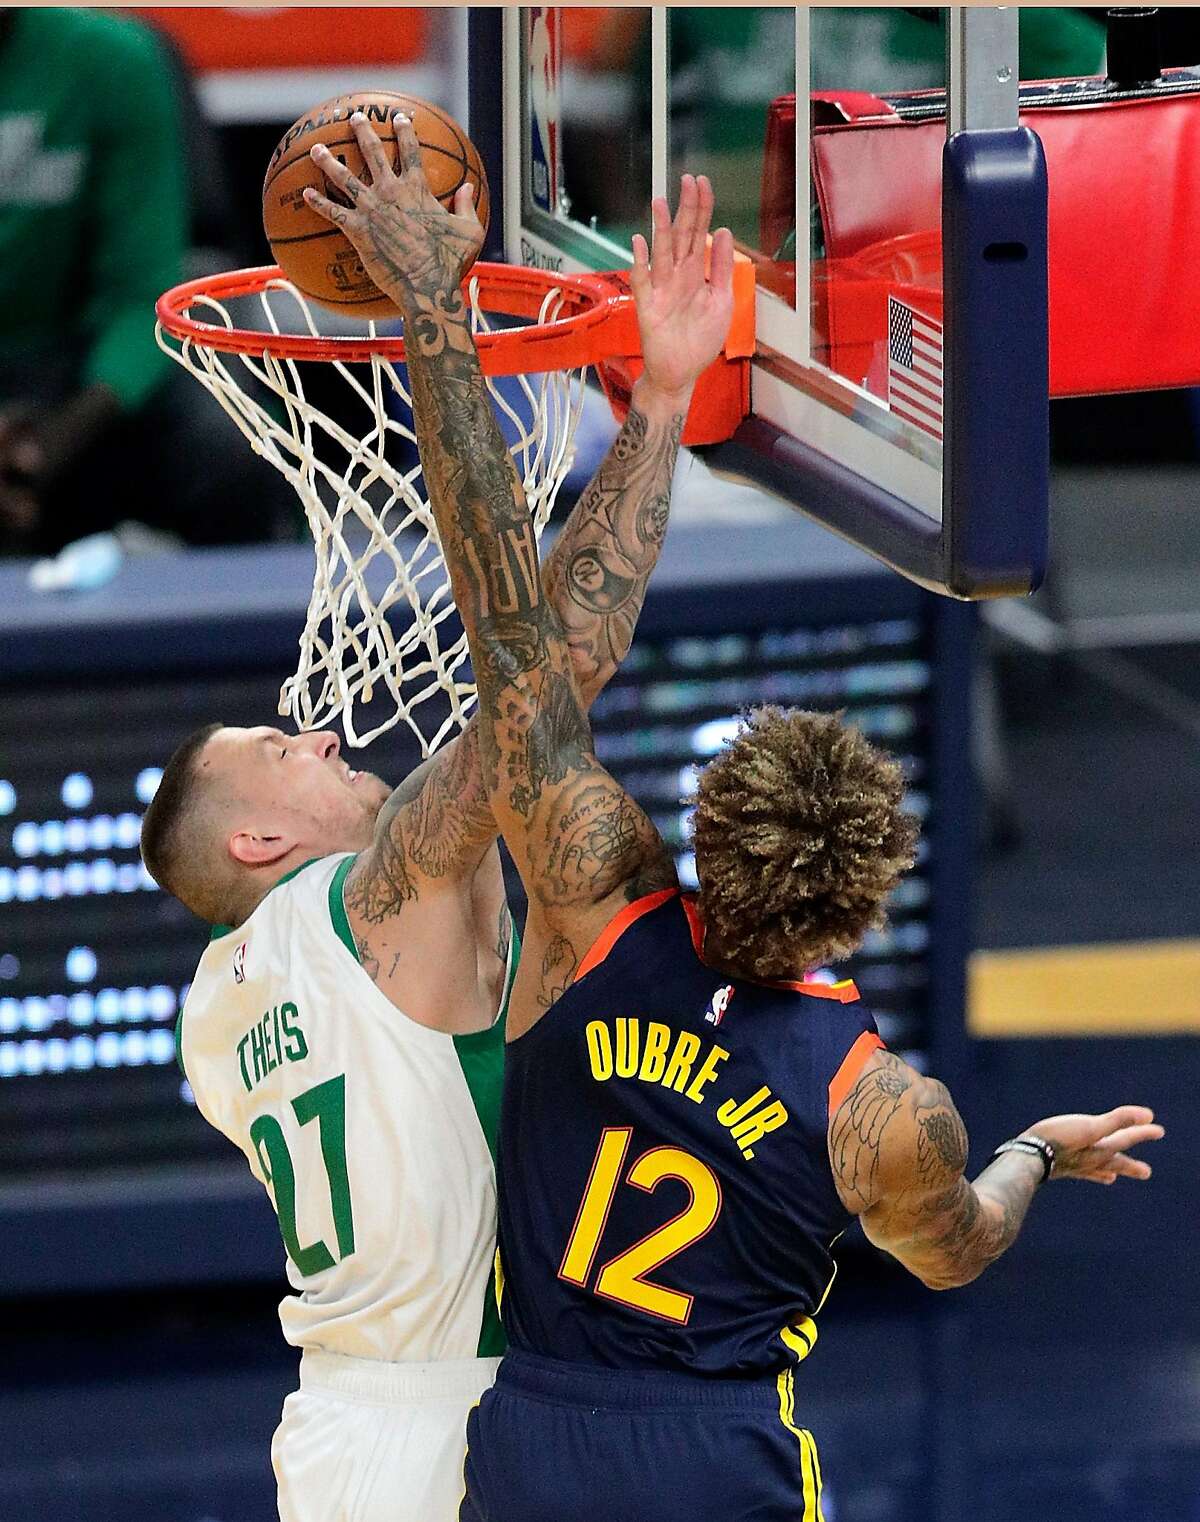 Kelly Oubre Jr., (12) dunks while defended by Daniel Theis (27) in the first half as the Golden State Warriors played the Boston Celtics at Chase Center in San Francisco, Calif., on Tuesday, February 2, 2021.